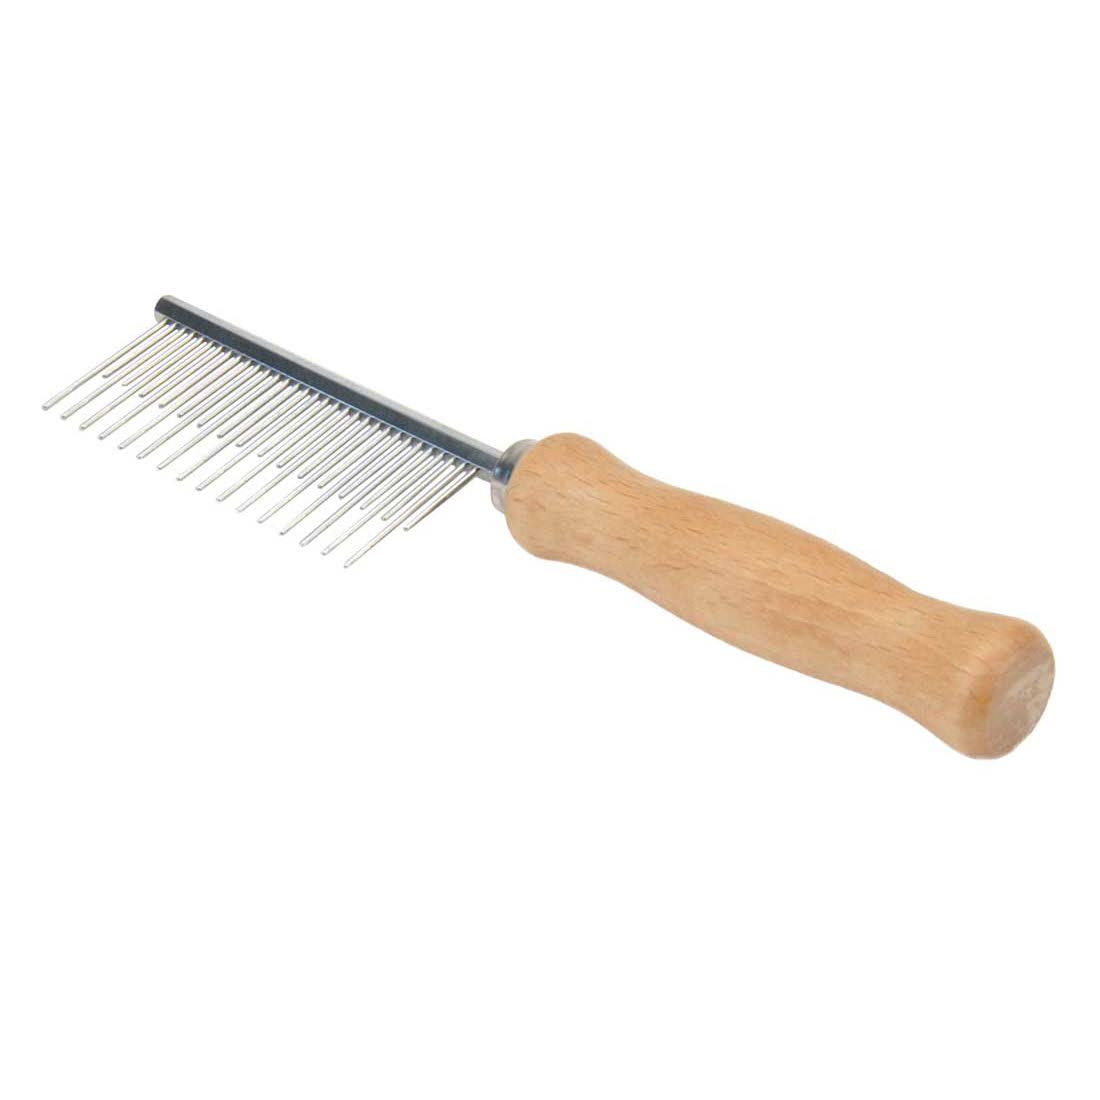 Safari Shedding Comb for Shorthaired Dogs - Wood Handle